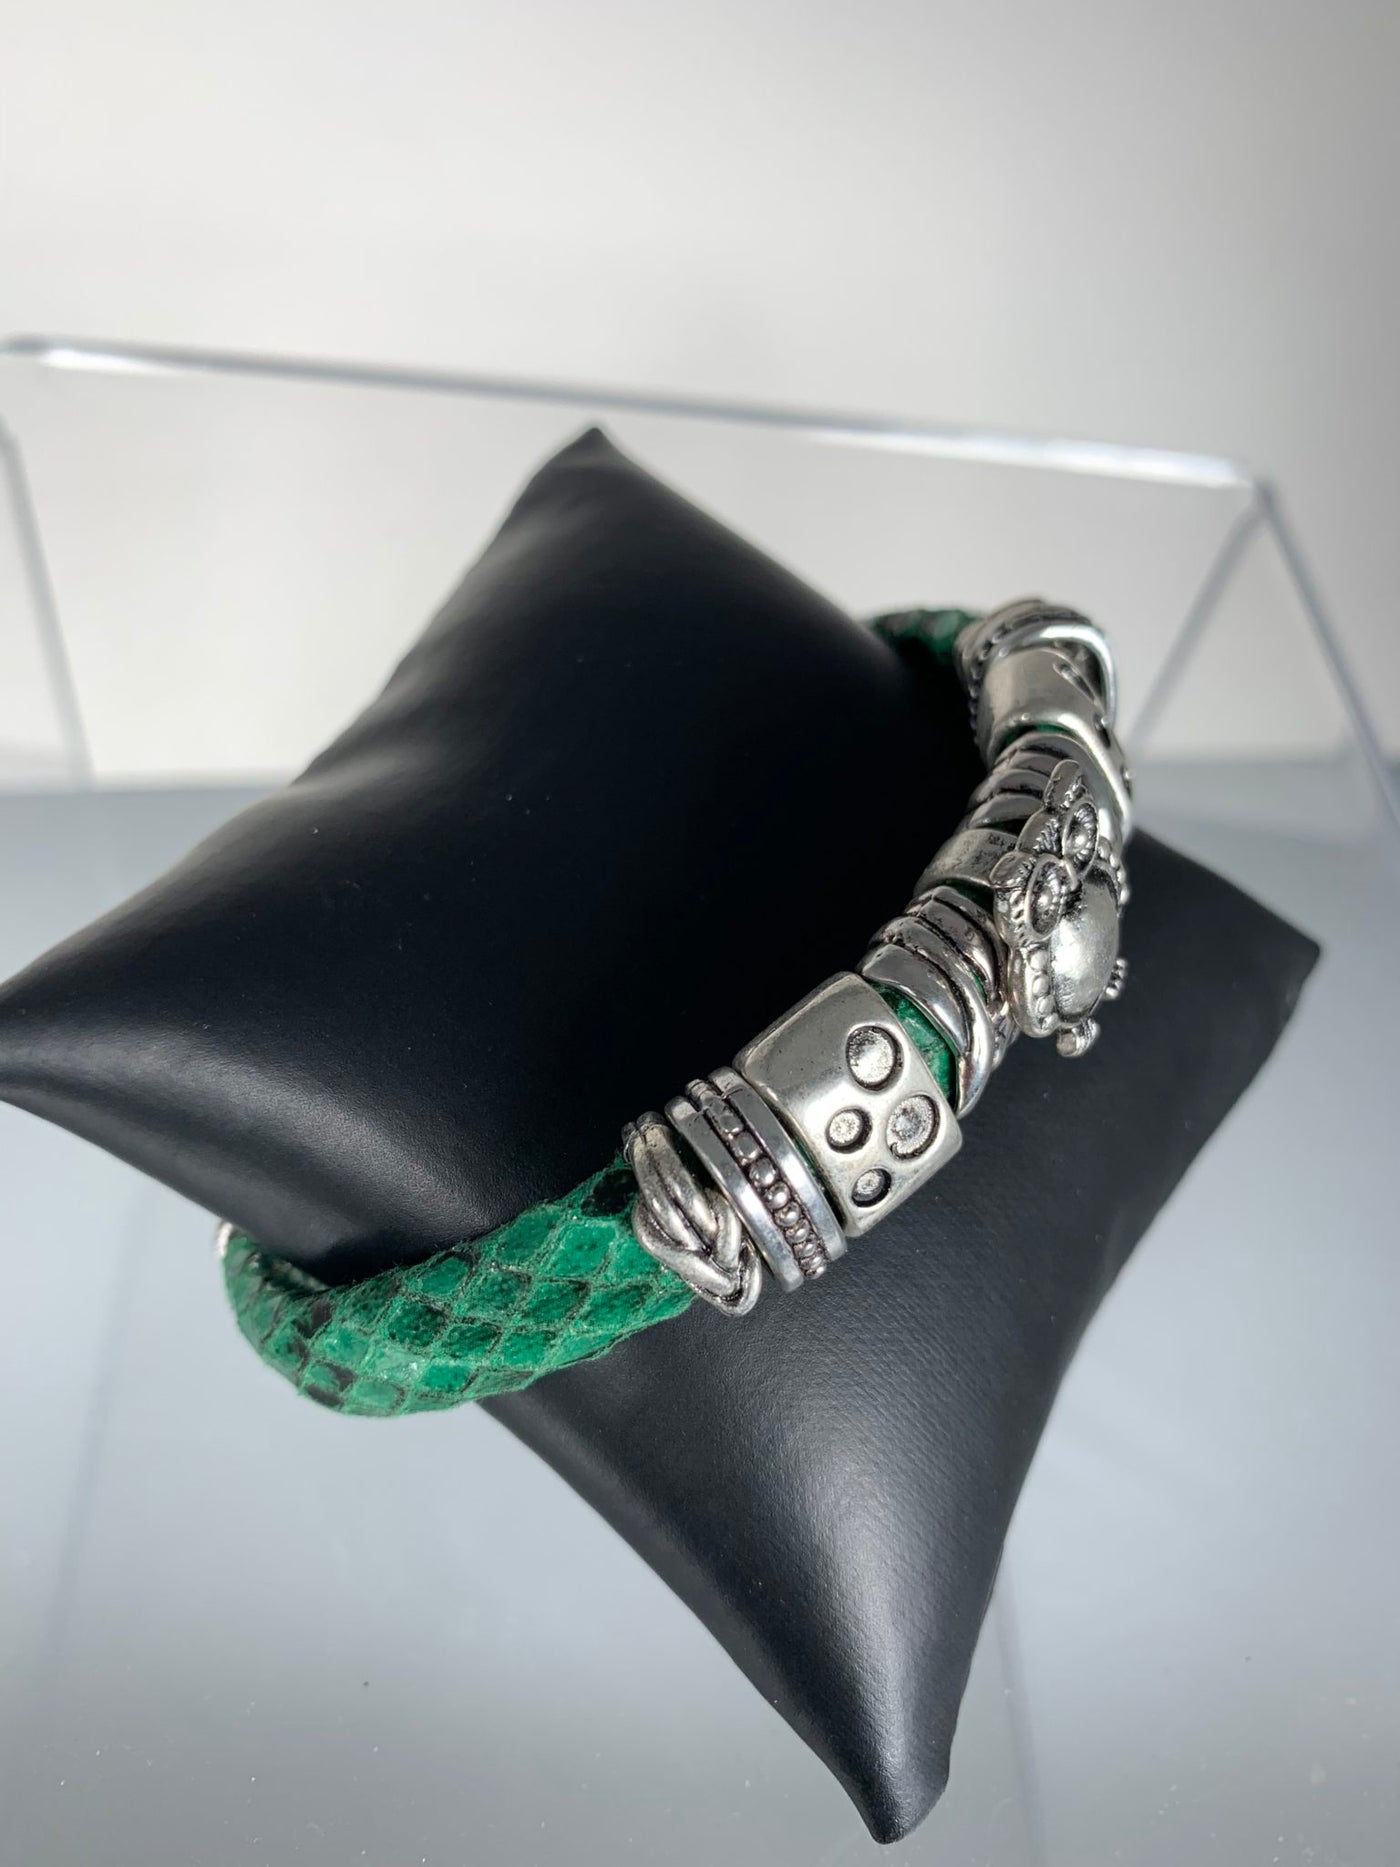 Green Faux Snake Skin Band Bracelet Featuring a Wise Owl